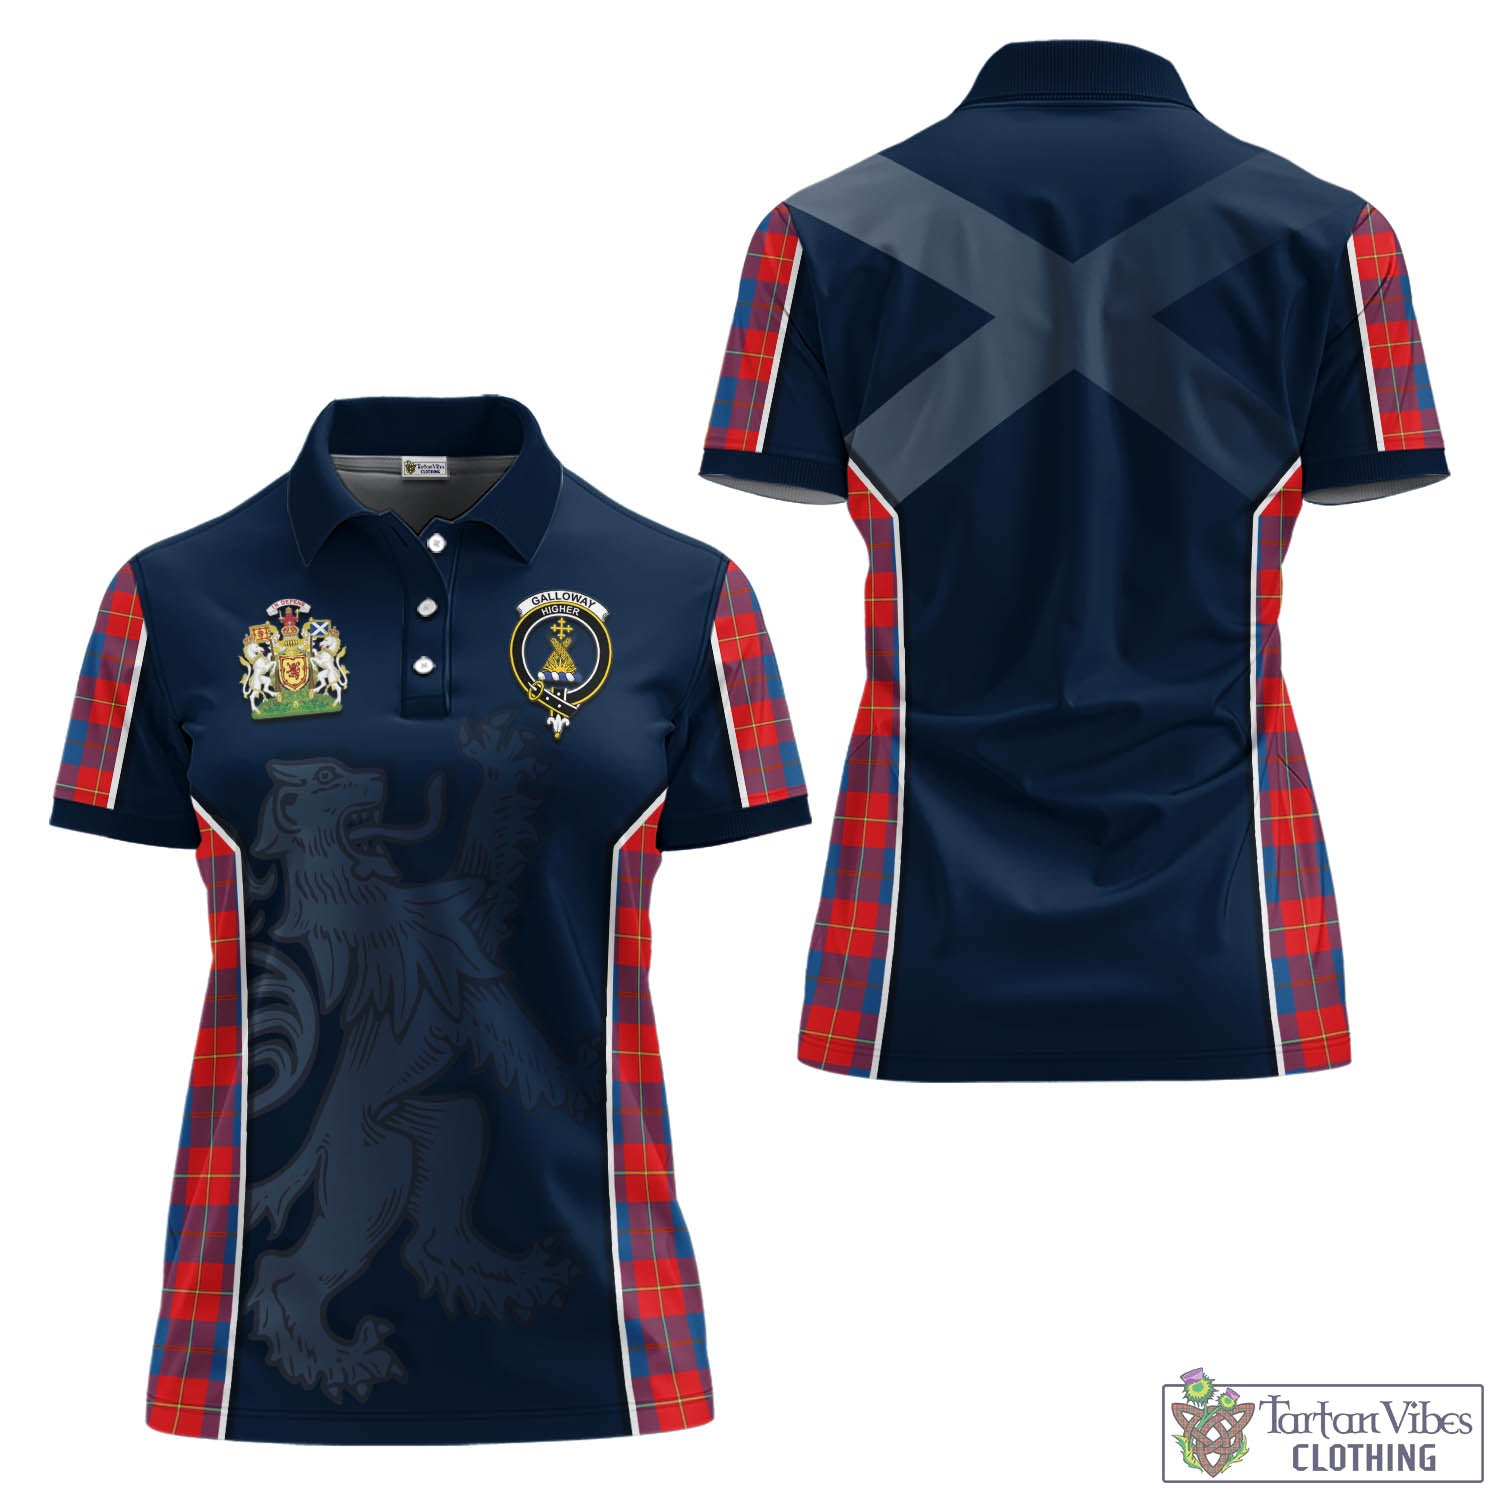 Tartan Vibes Clothing Galloway Red Tartan Women's Polo Shirt with Family Crest and Lion Rampant Vibes Sport Style